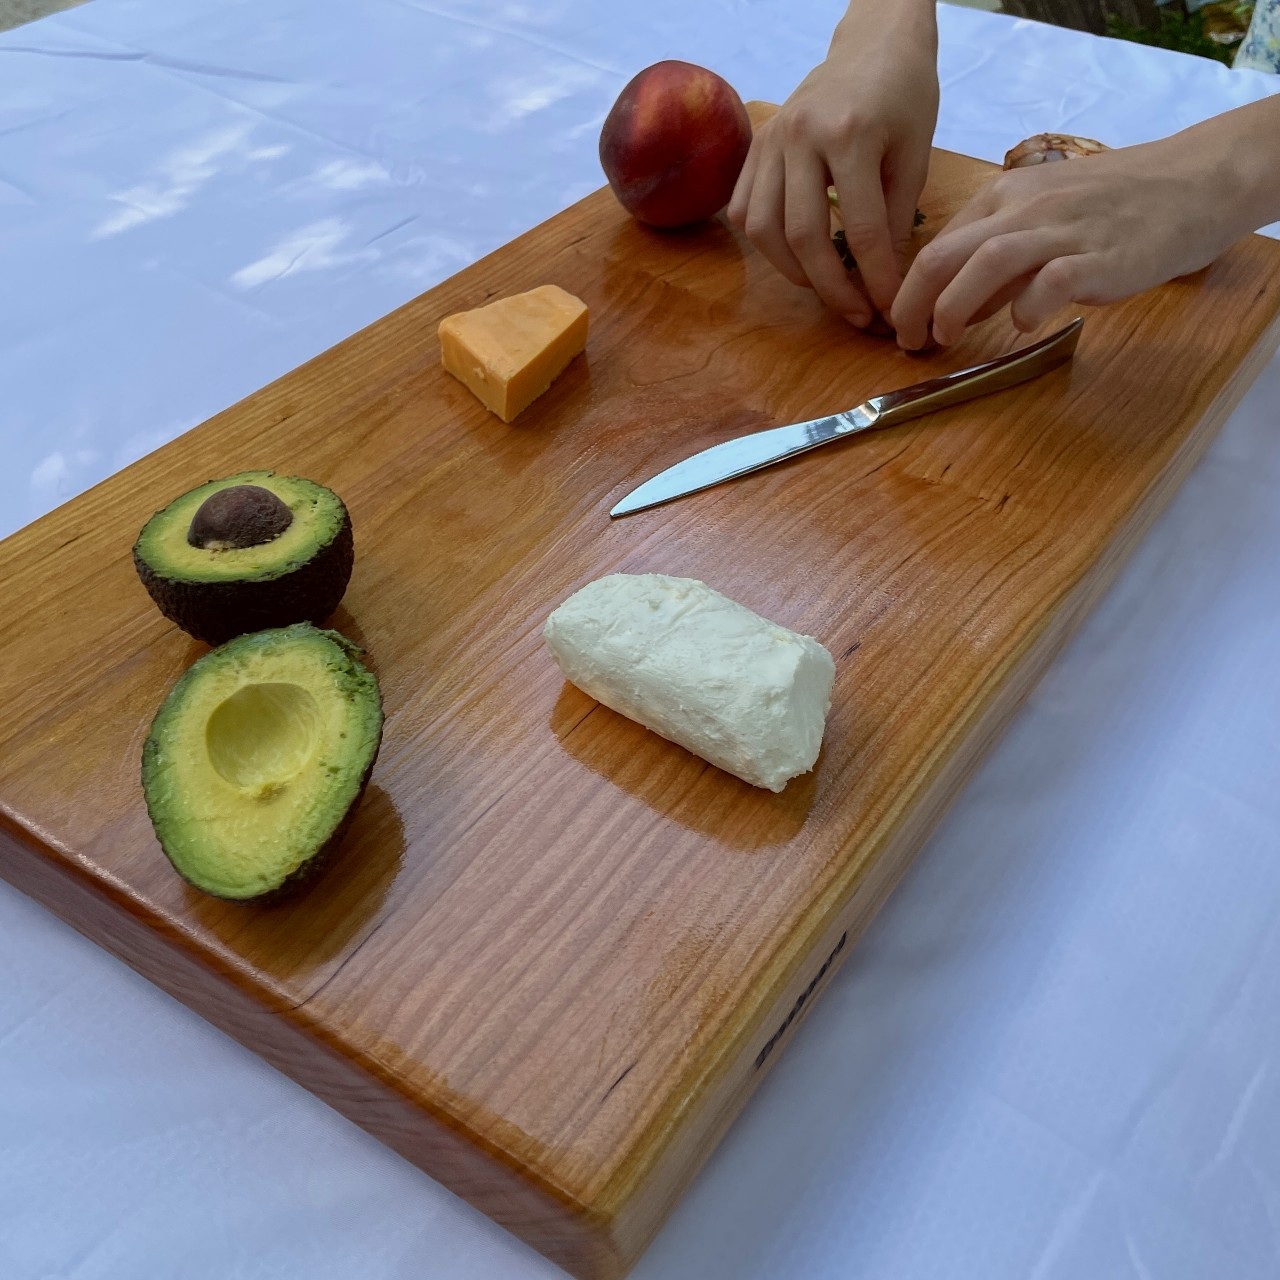 https://cdn11.bigcommerce.com/s-1vey7r6116/images/stencil/1280x1280/products/136/518/cherry-serving-board-by-Treeboard-cheese-hands-avocado-hands__40304.1693096834.jpg?c=1